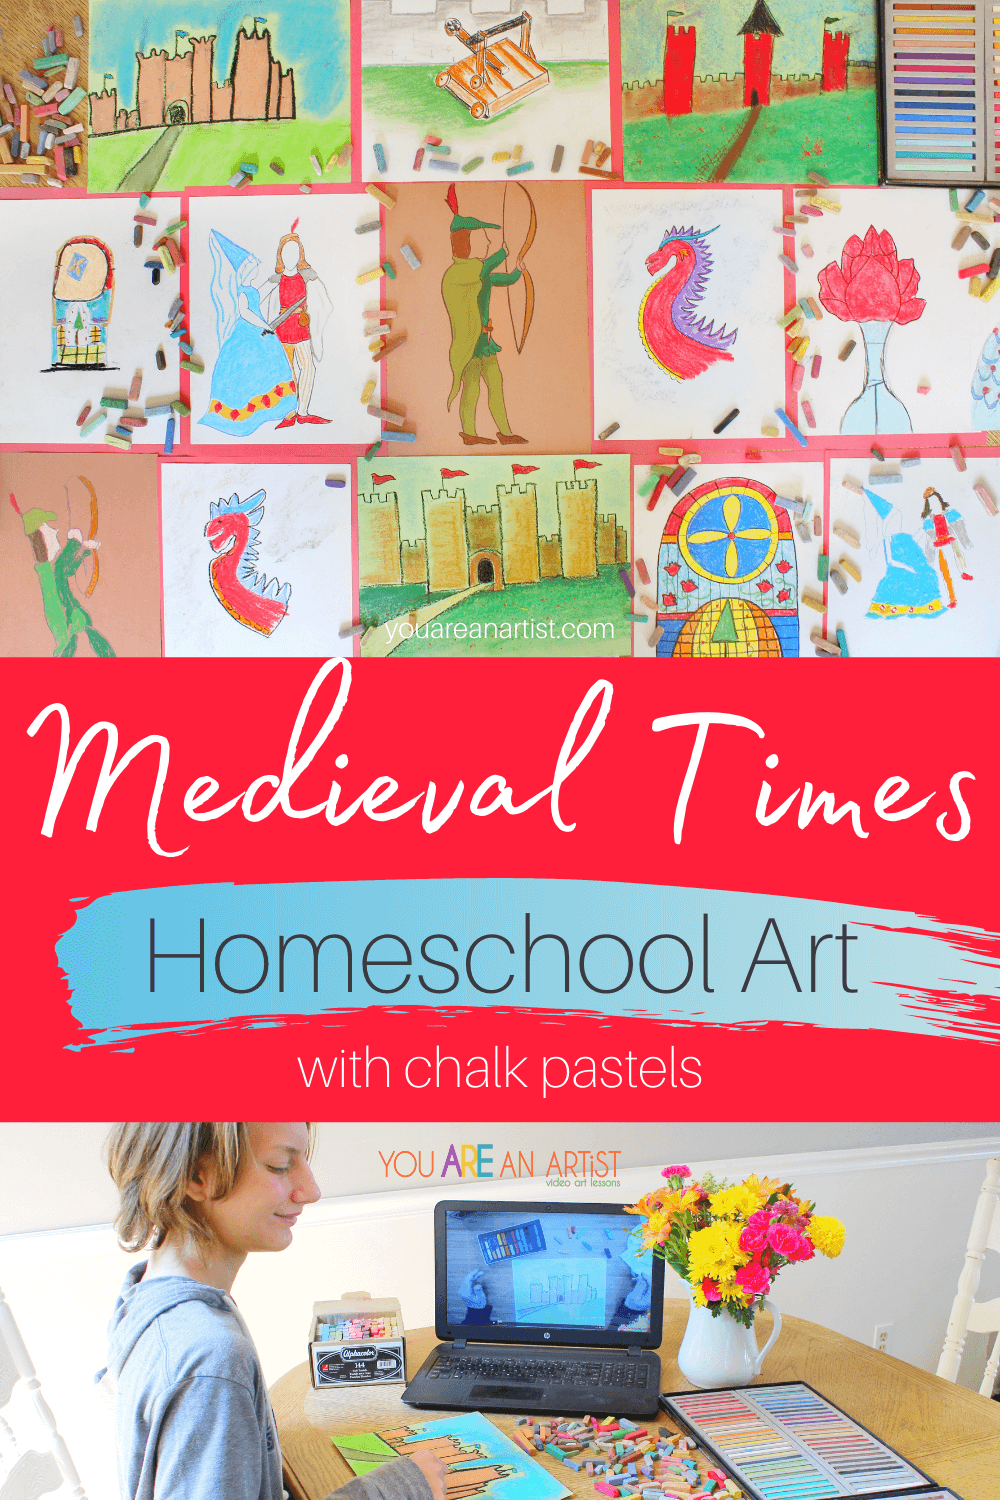 Medieval Times Homeschool Art with Chalk Pastels: Learn about Medieval times with chalk pastel video art lessons! It's the perfect hands-on way to bring a bit of color and excitement to history. #medievalhistory #medievaltimes #medievaltimeshomeschool #medievaltimeshomeschoolart #medievalunitstudy #homeschoolart #chalkpastels #YouAREAnArtist 